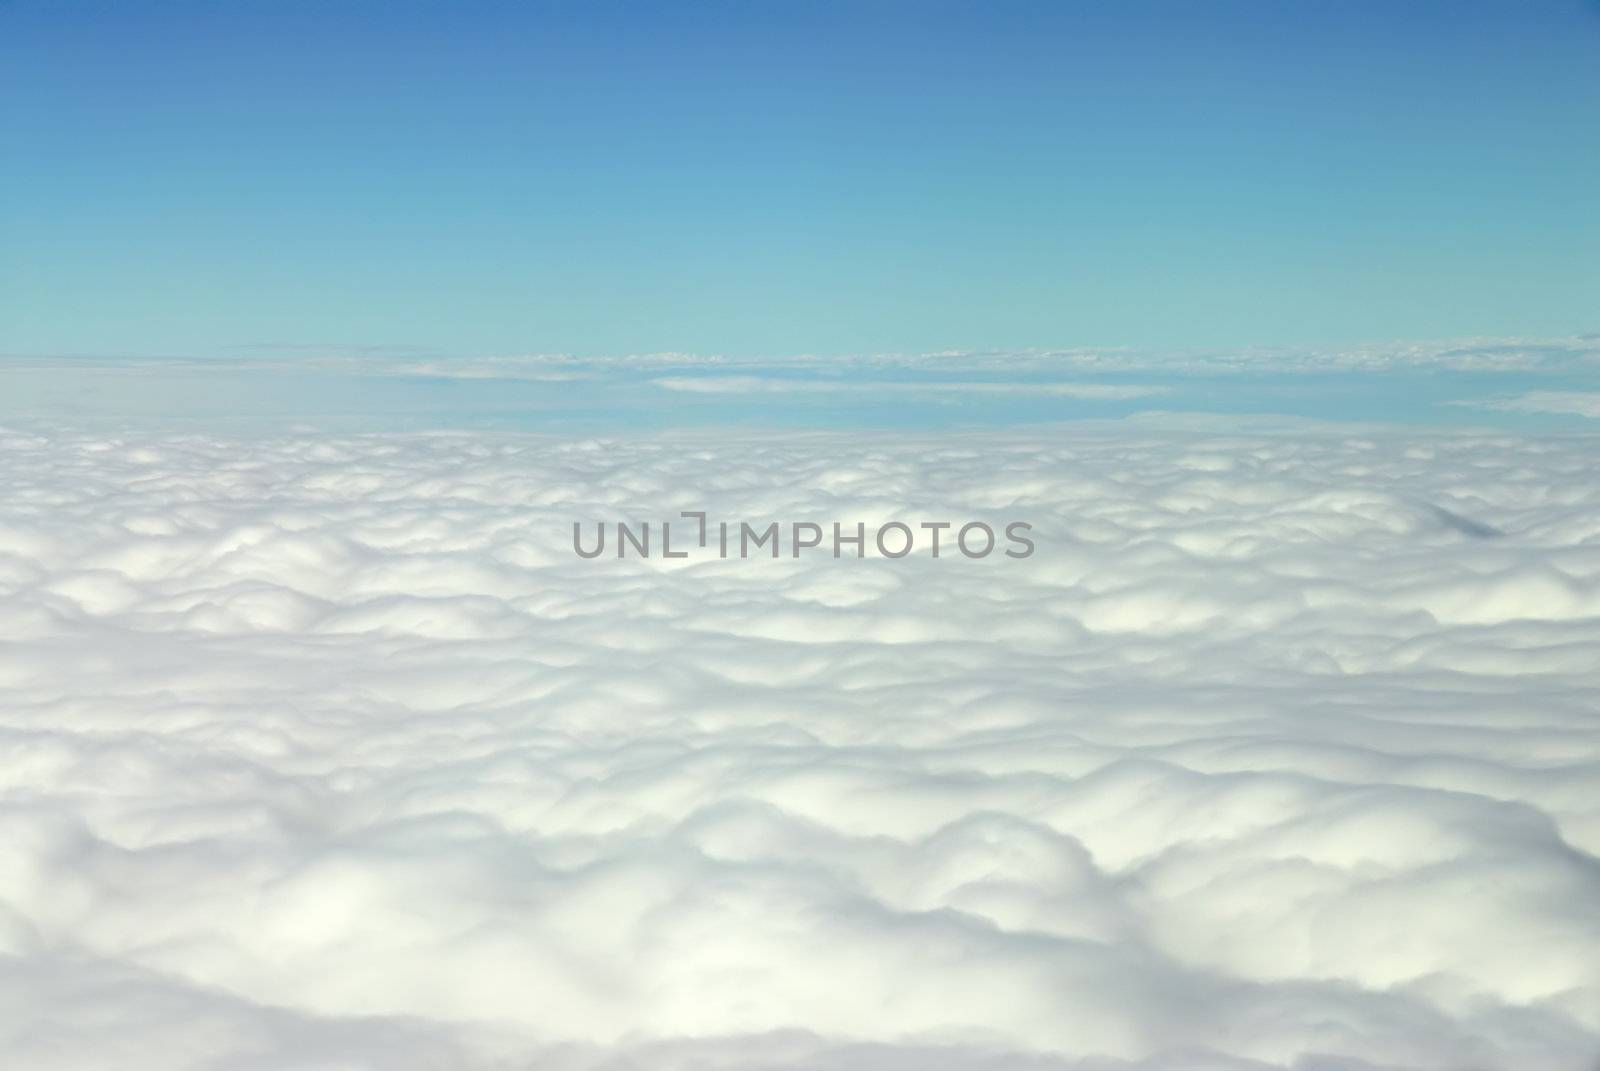 A beautiful cloud scape with reminds us of childhood dreams and fantasies